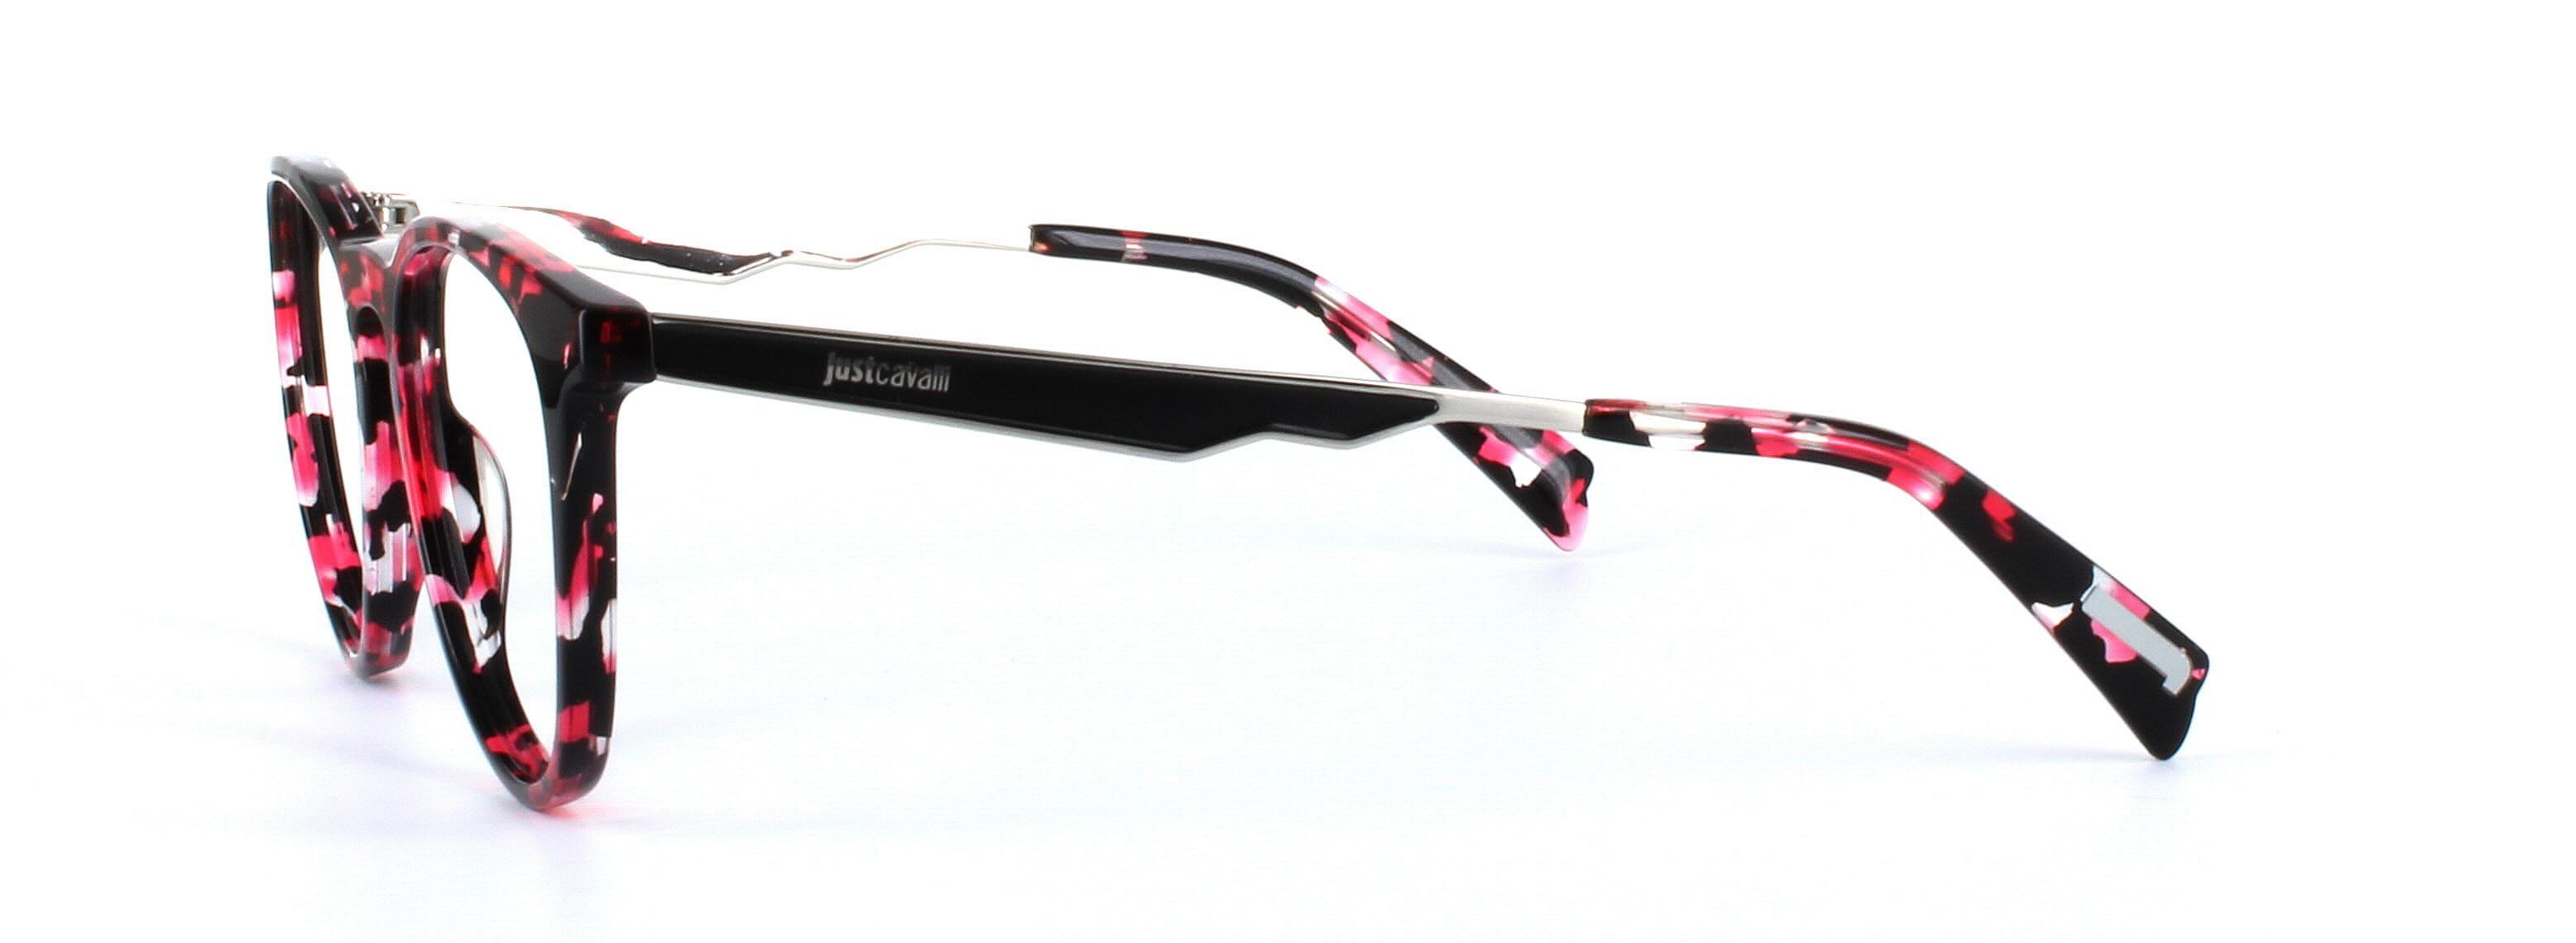 JUST CAVALLI (JC0879-55A) Black and Red Full Rim Round Acetate Glasses - Image View 2